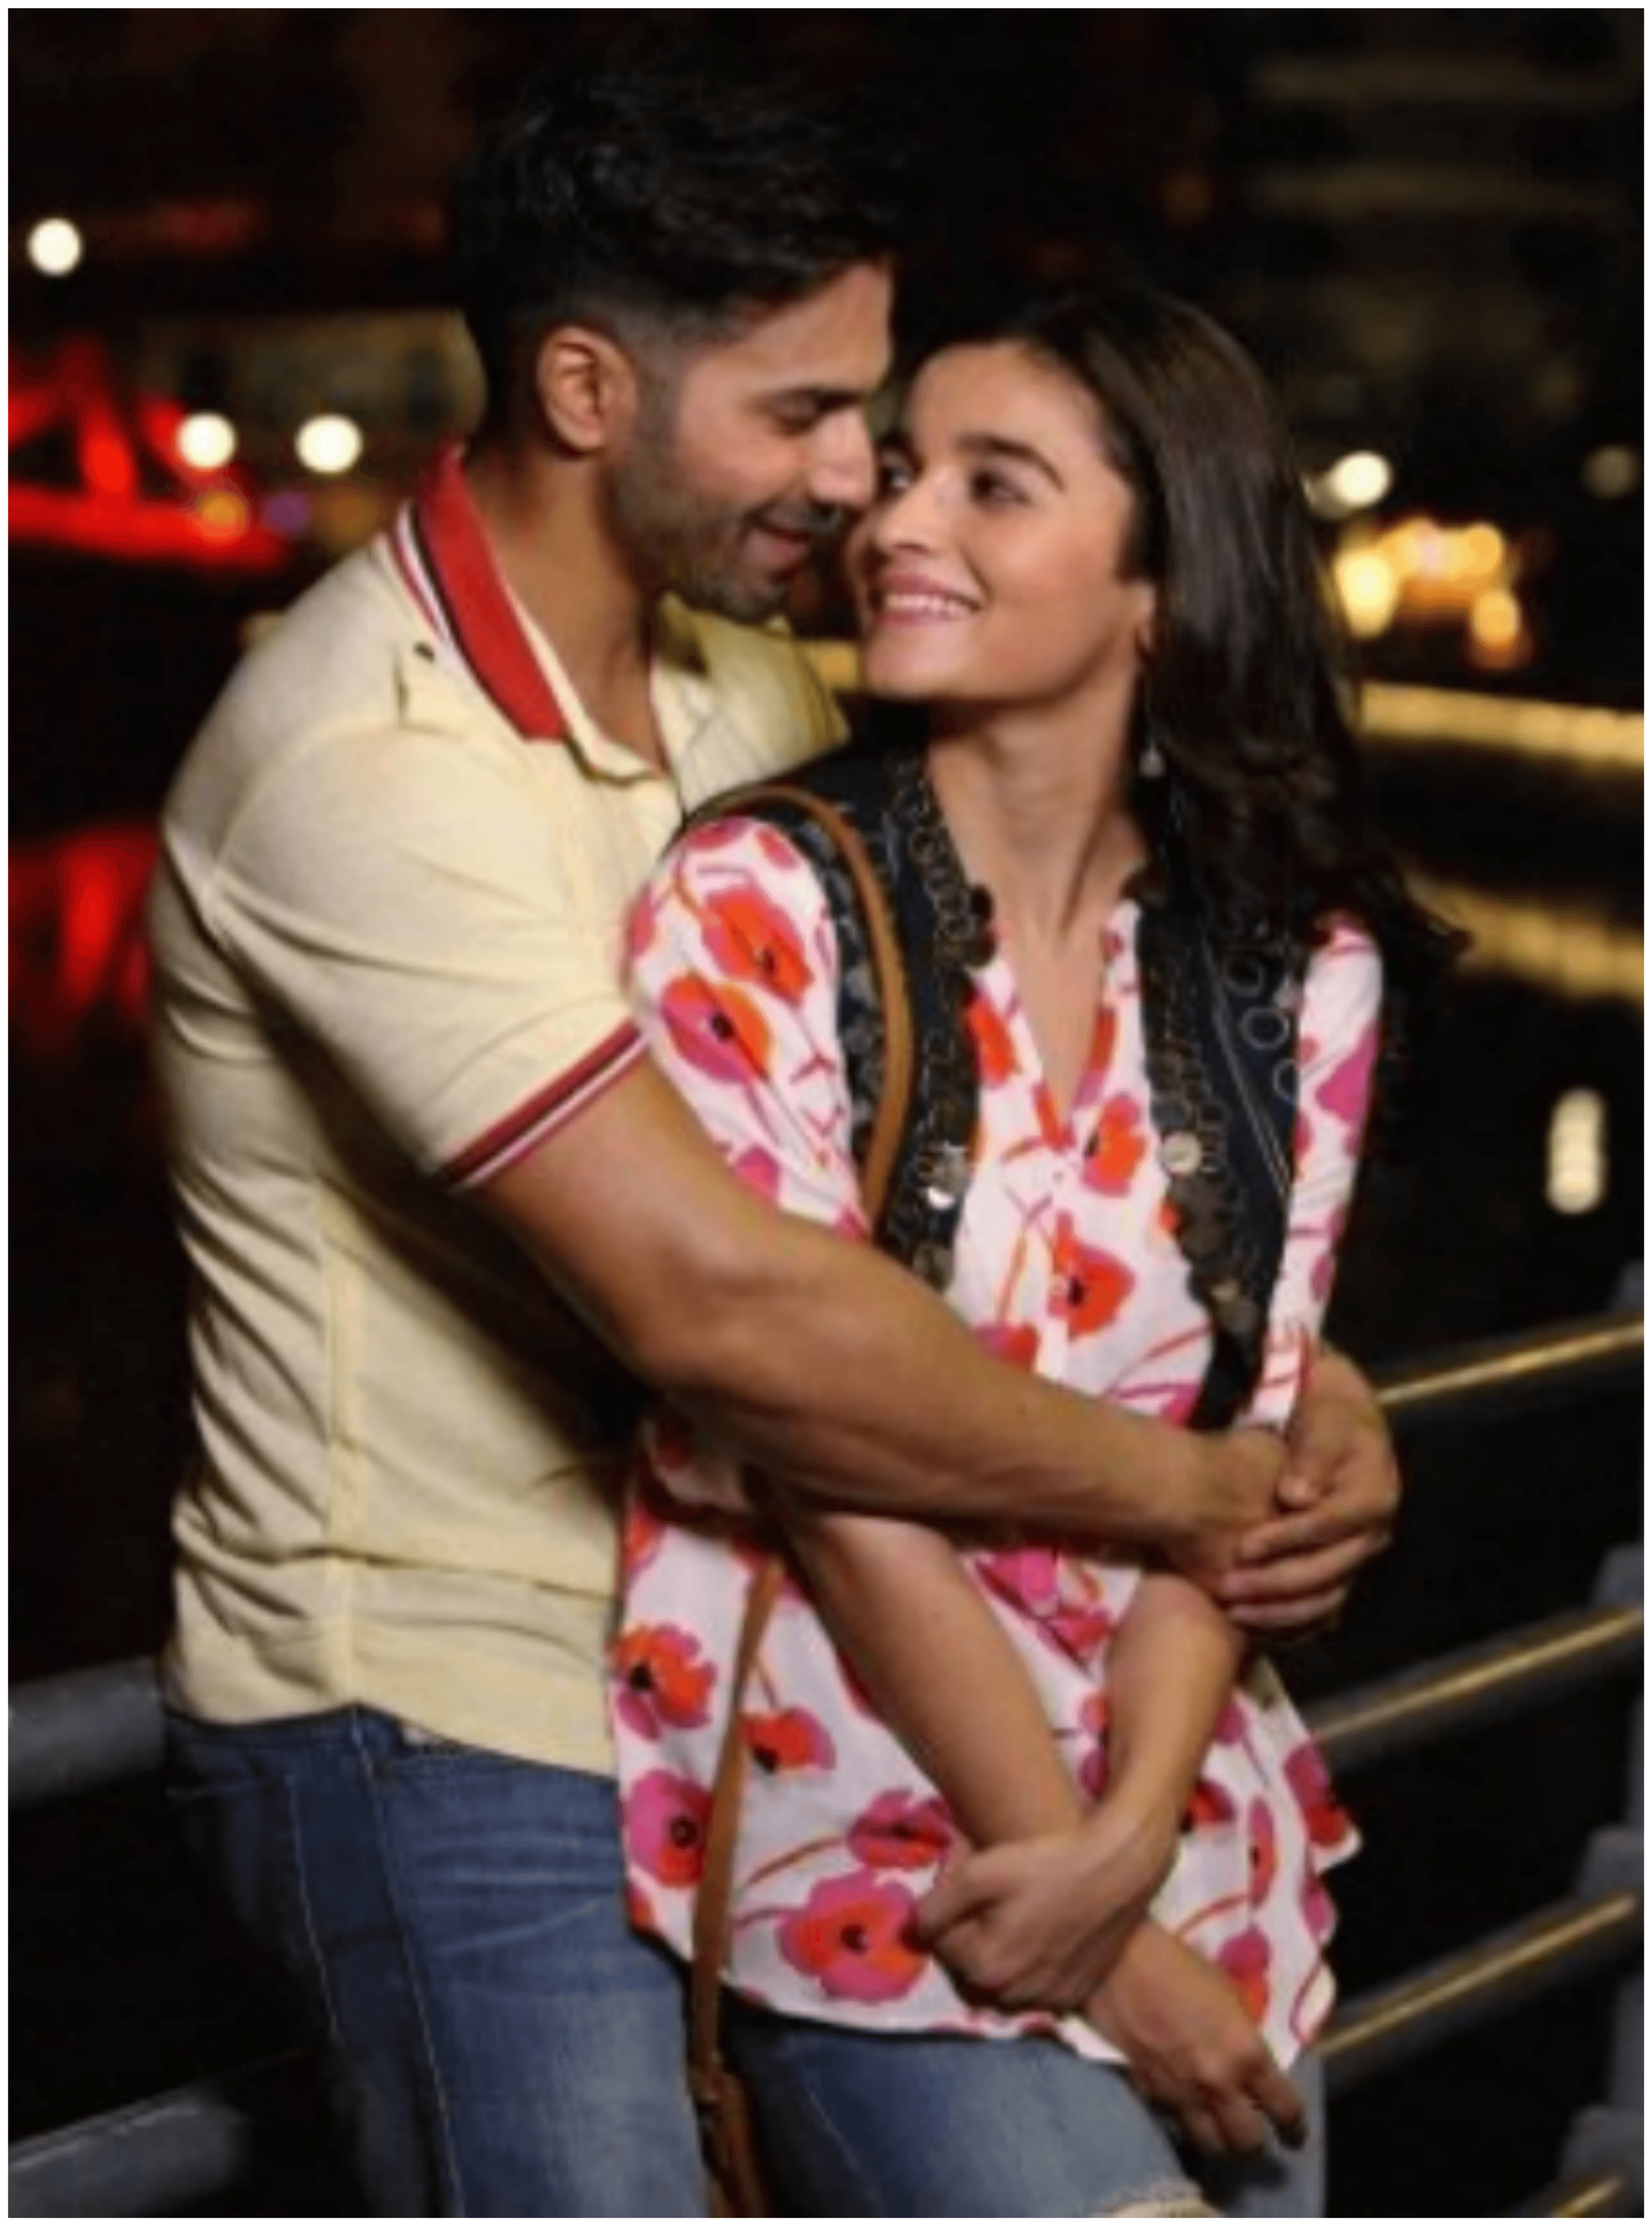 Check out: Varun and Alia are too adorable in these new